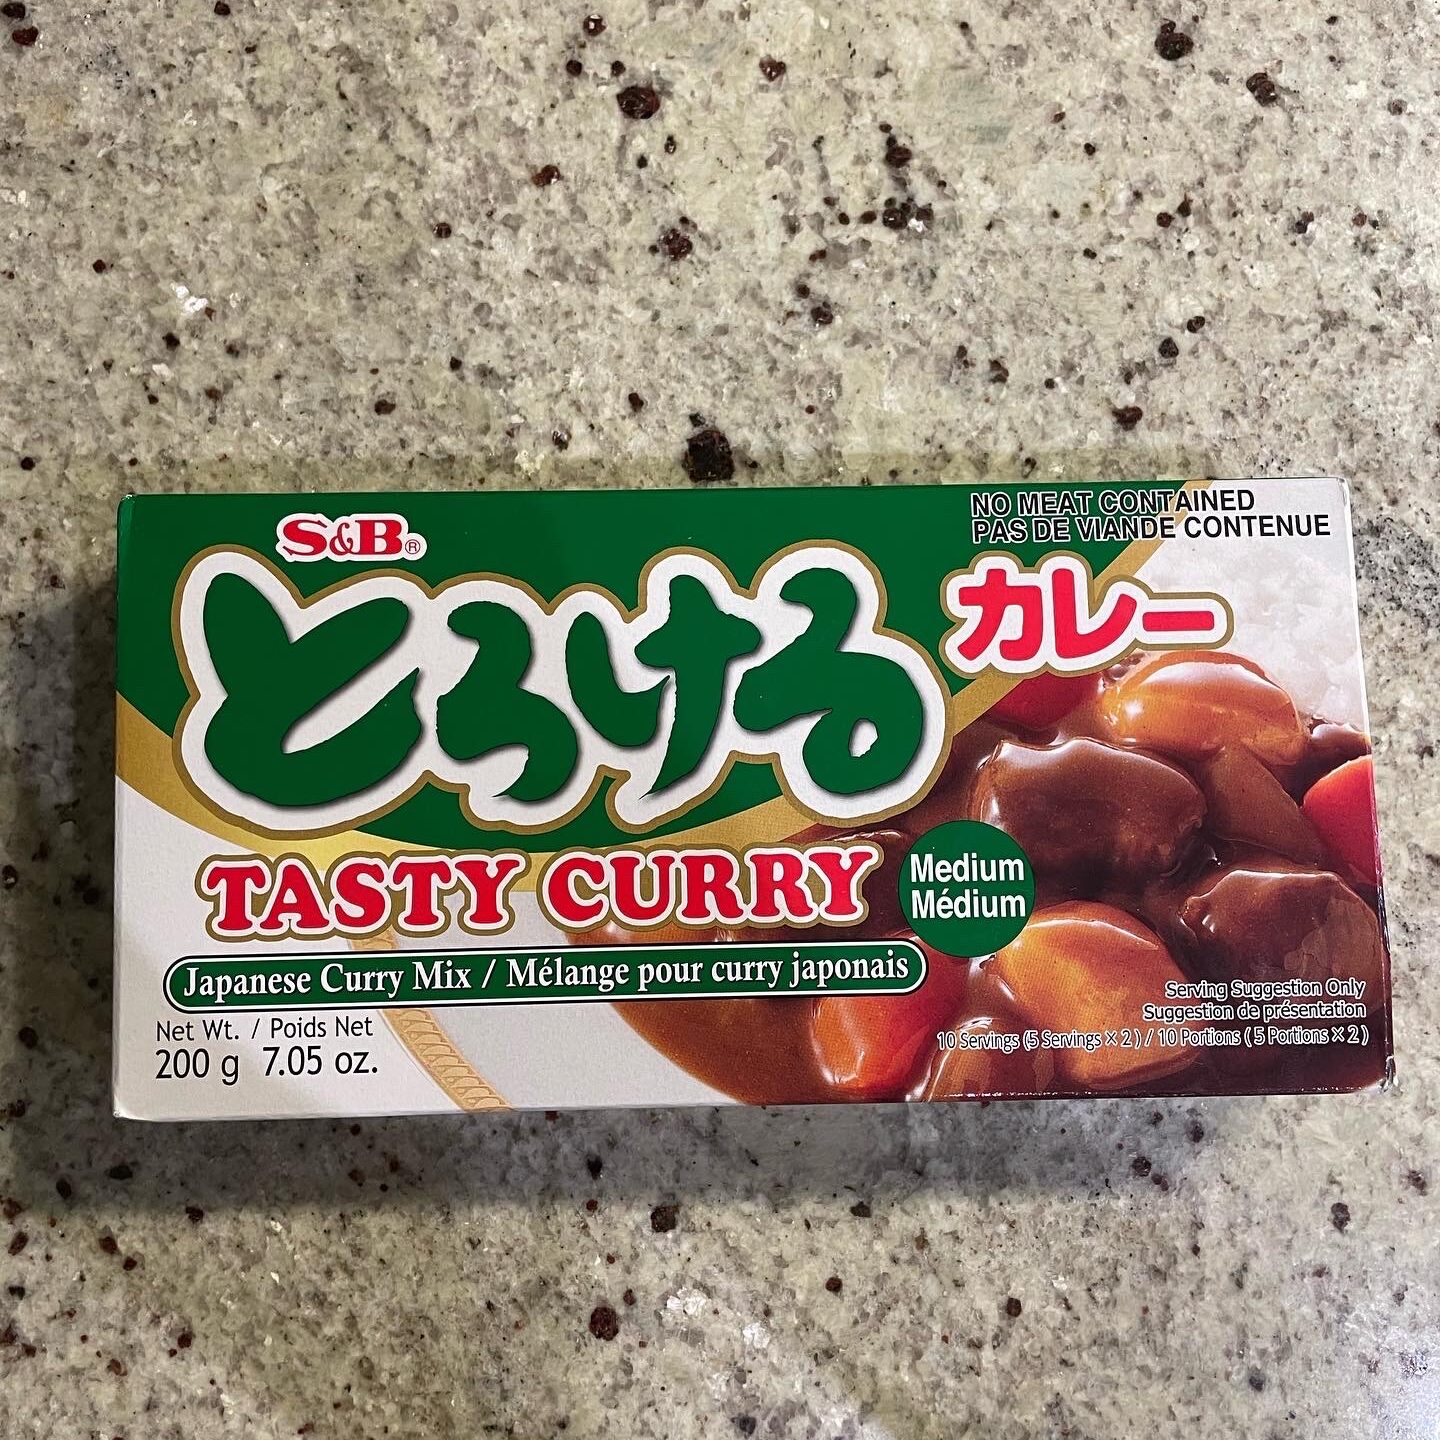 Medium spice Japanese curry mix from the brand "Tasty Curry."